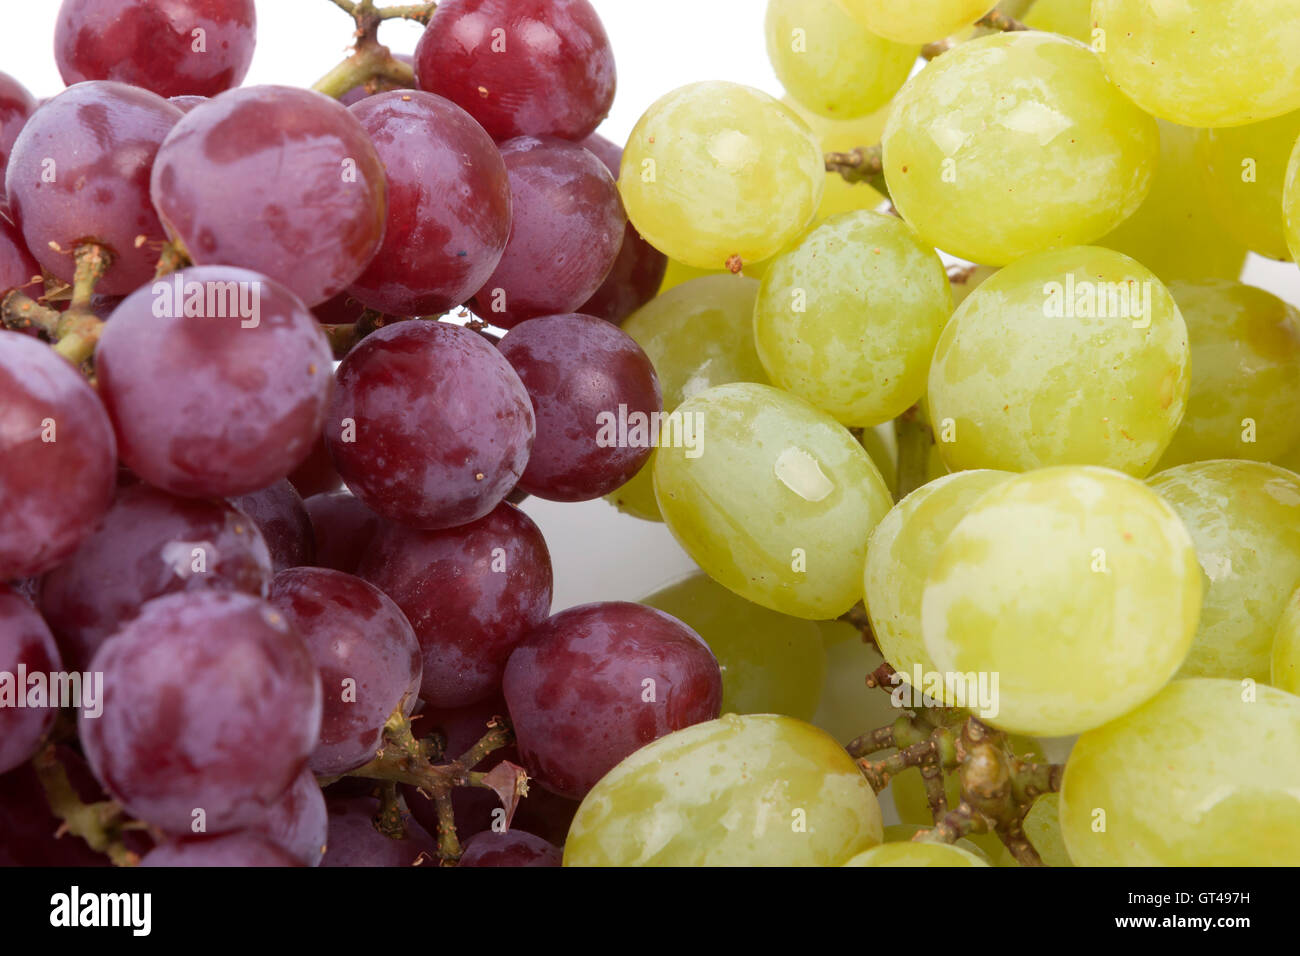 bunch of green and red grapes on a white background Stock Photo